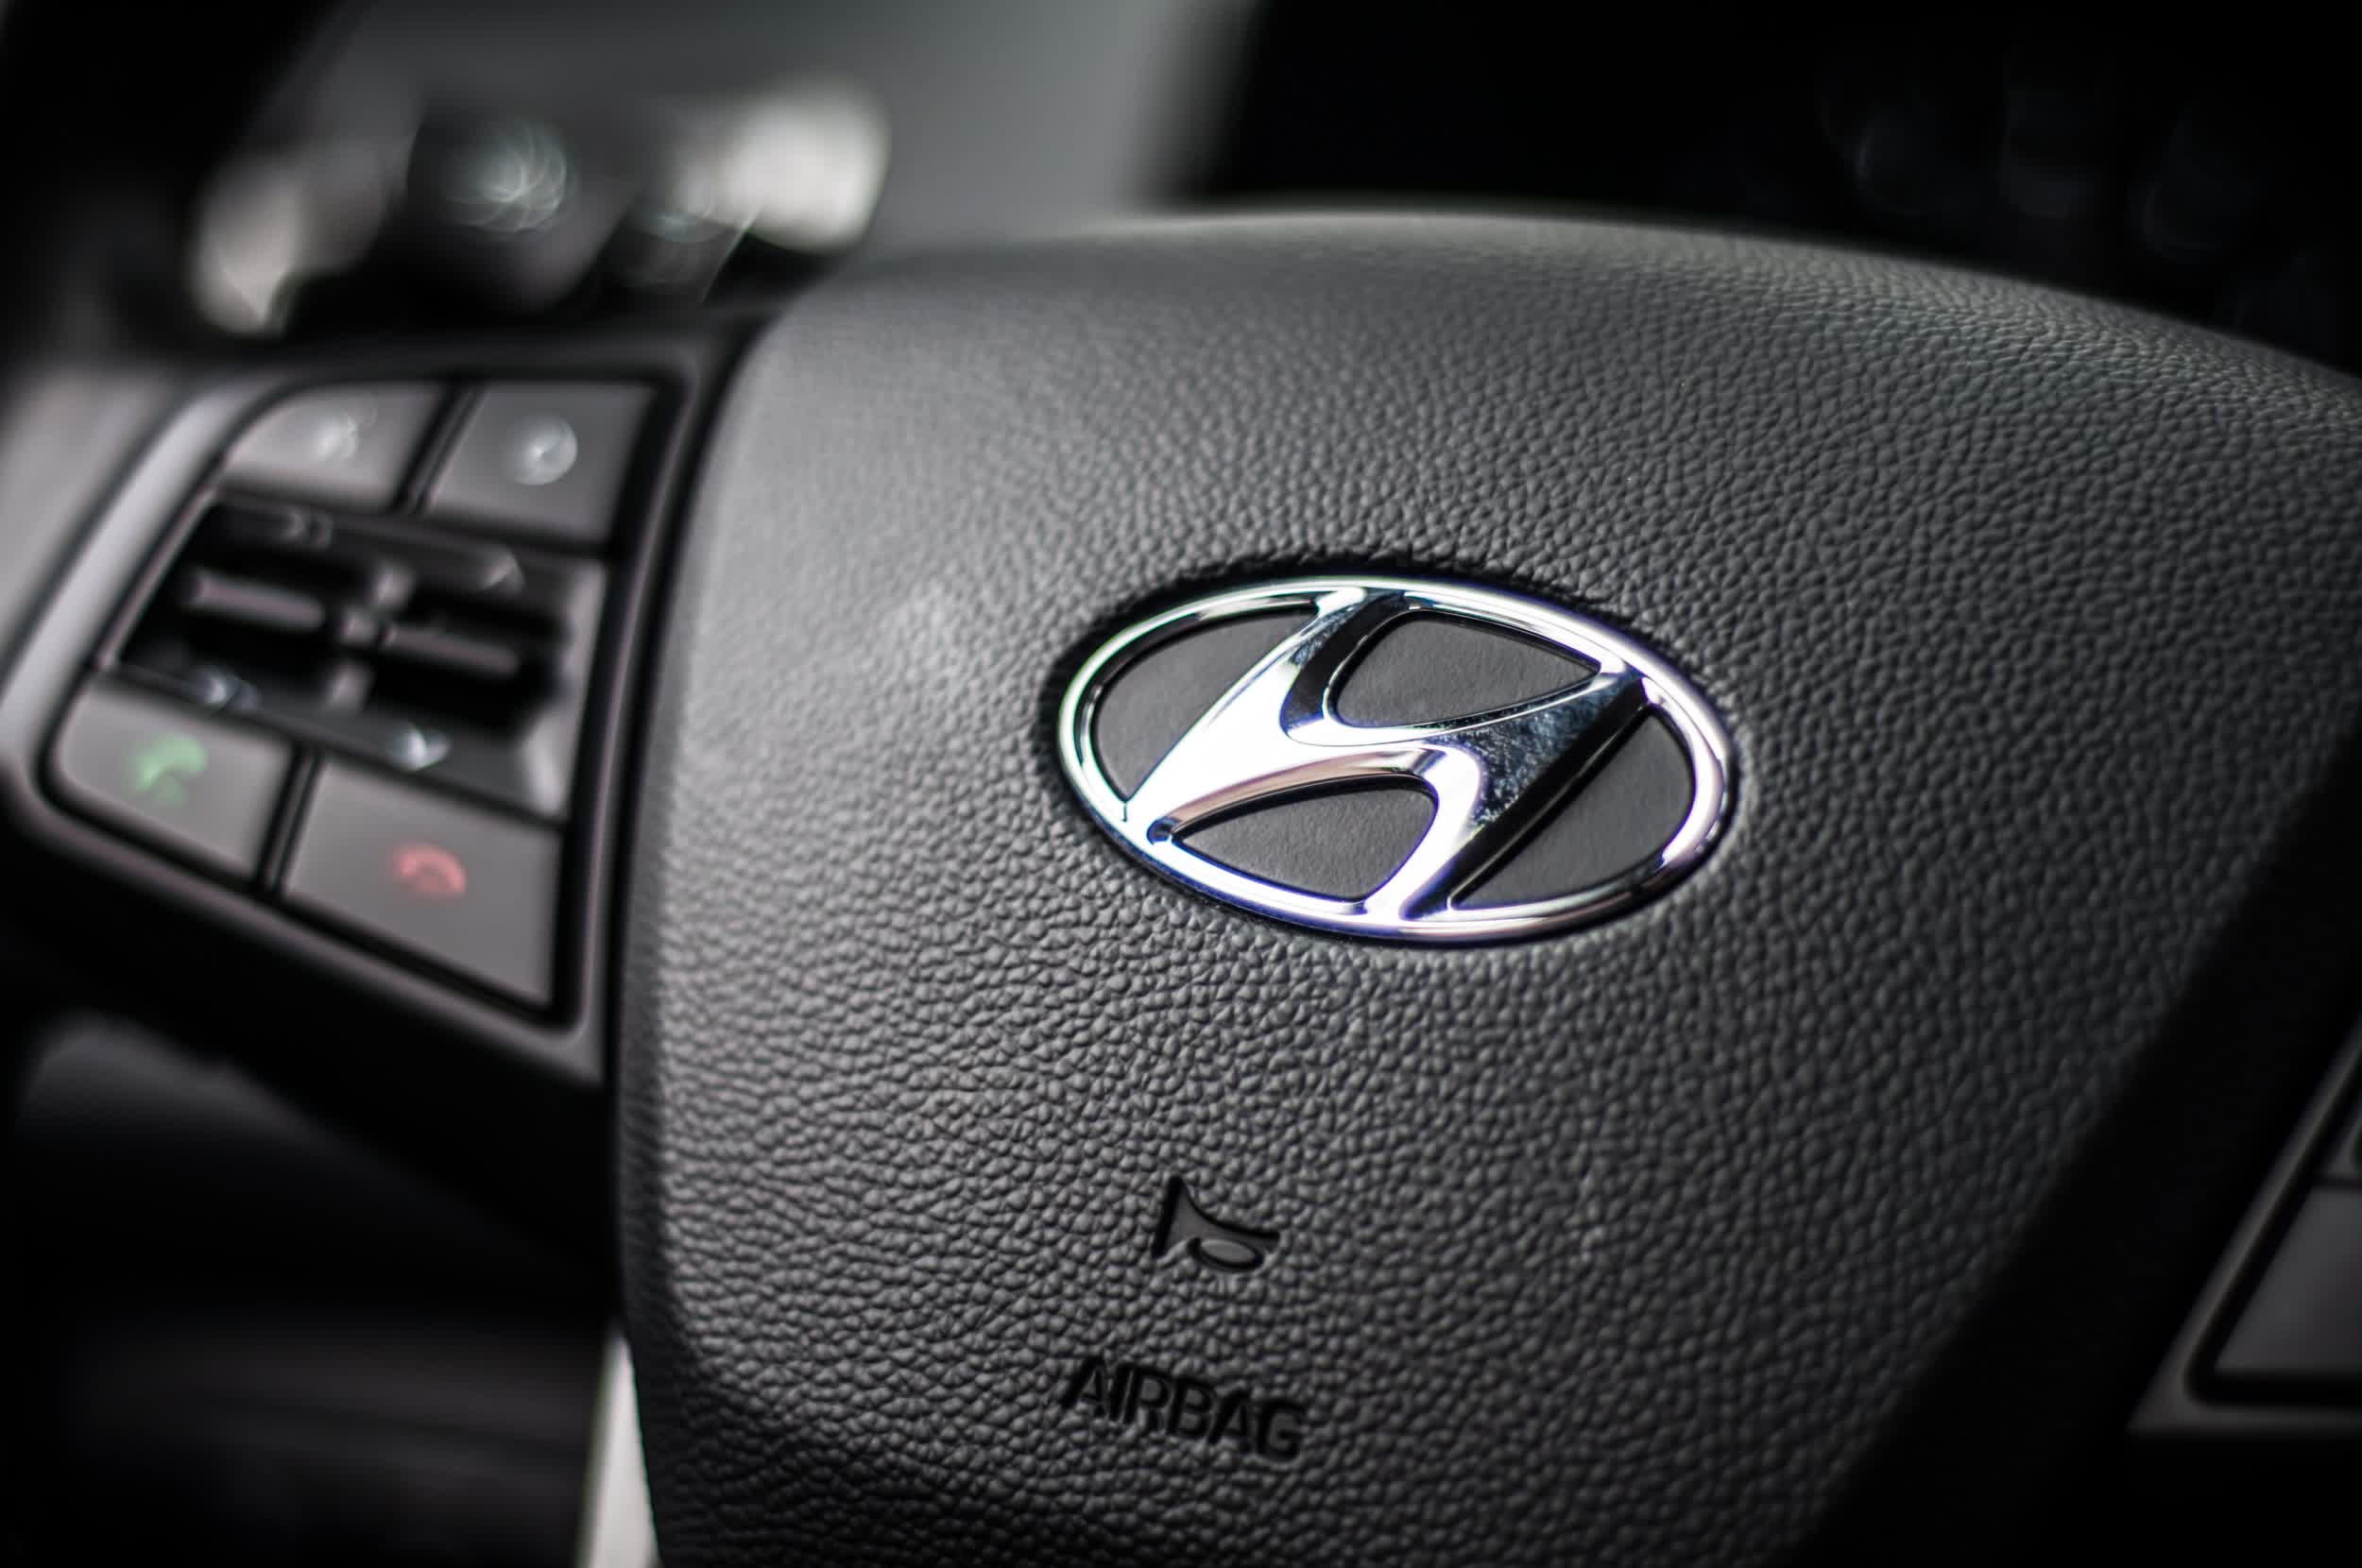 Hyundai confirms early talks with Apple to develop an electric car